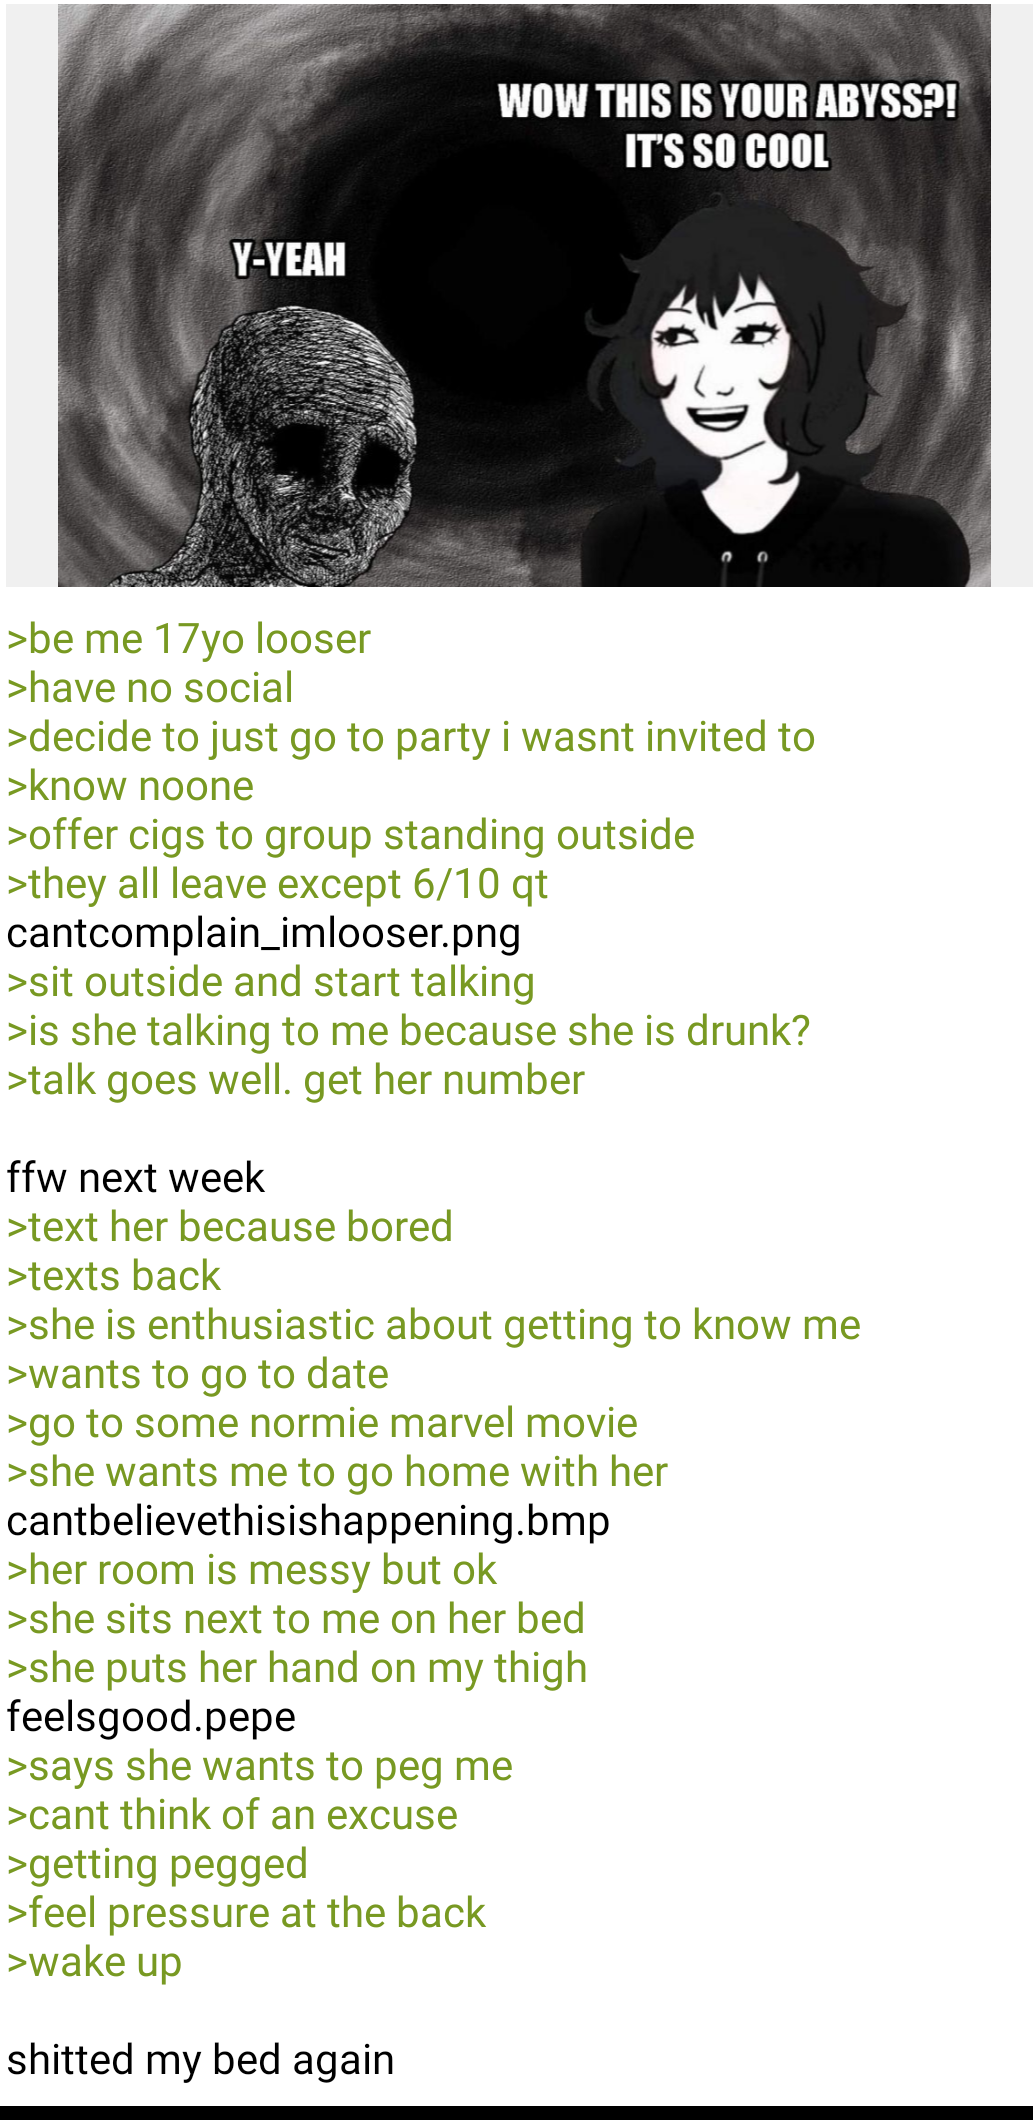 Anon isn't invited to a party